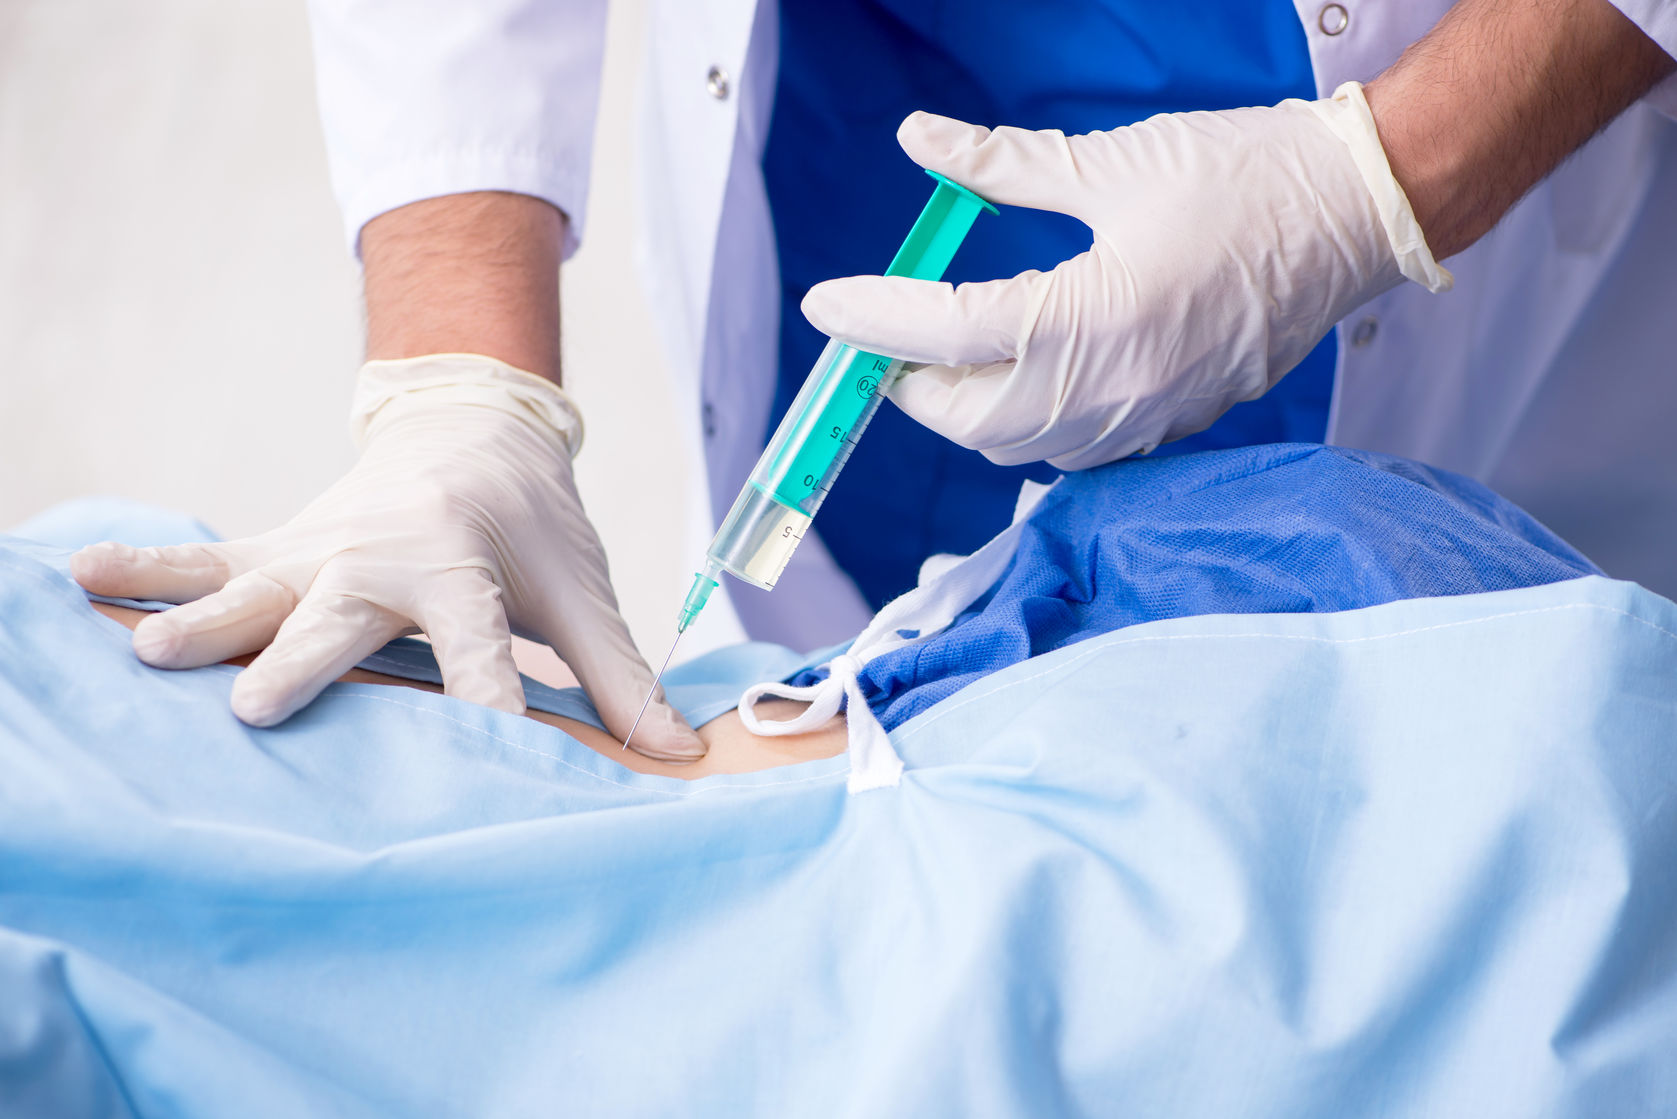 Treating Spine Injuries With Epidural Injections